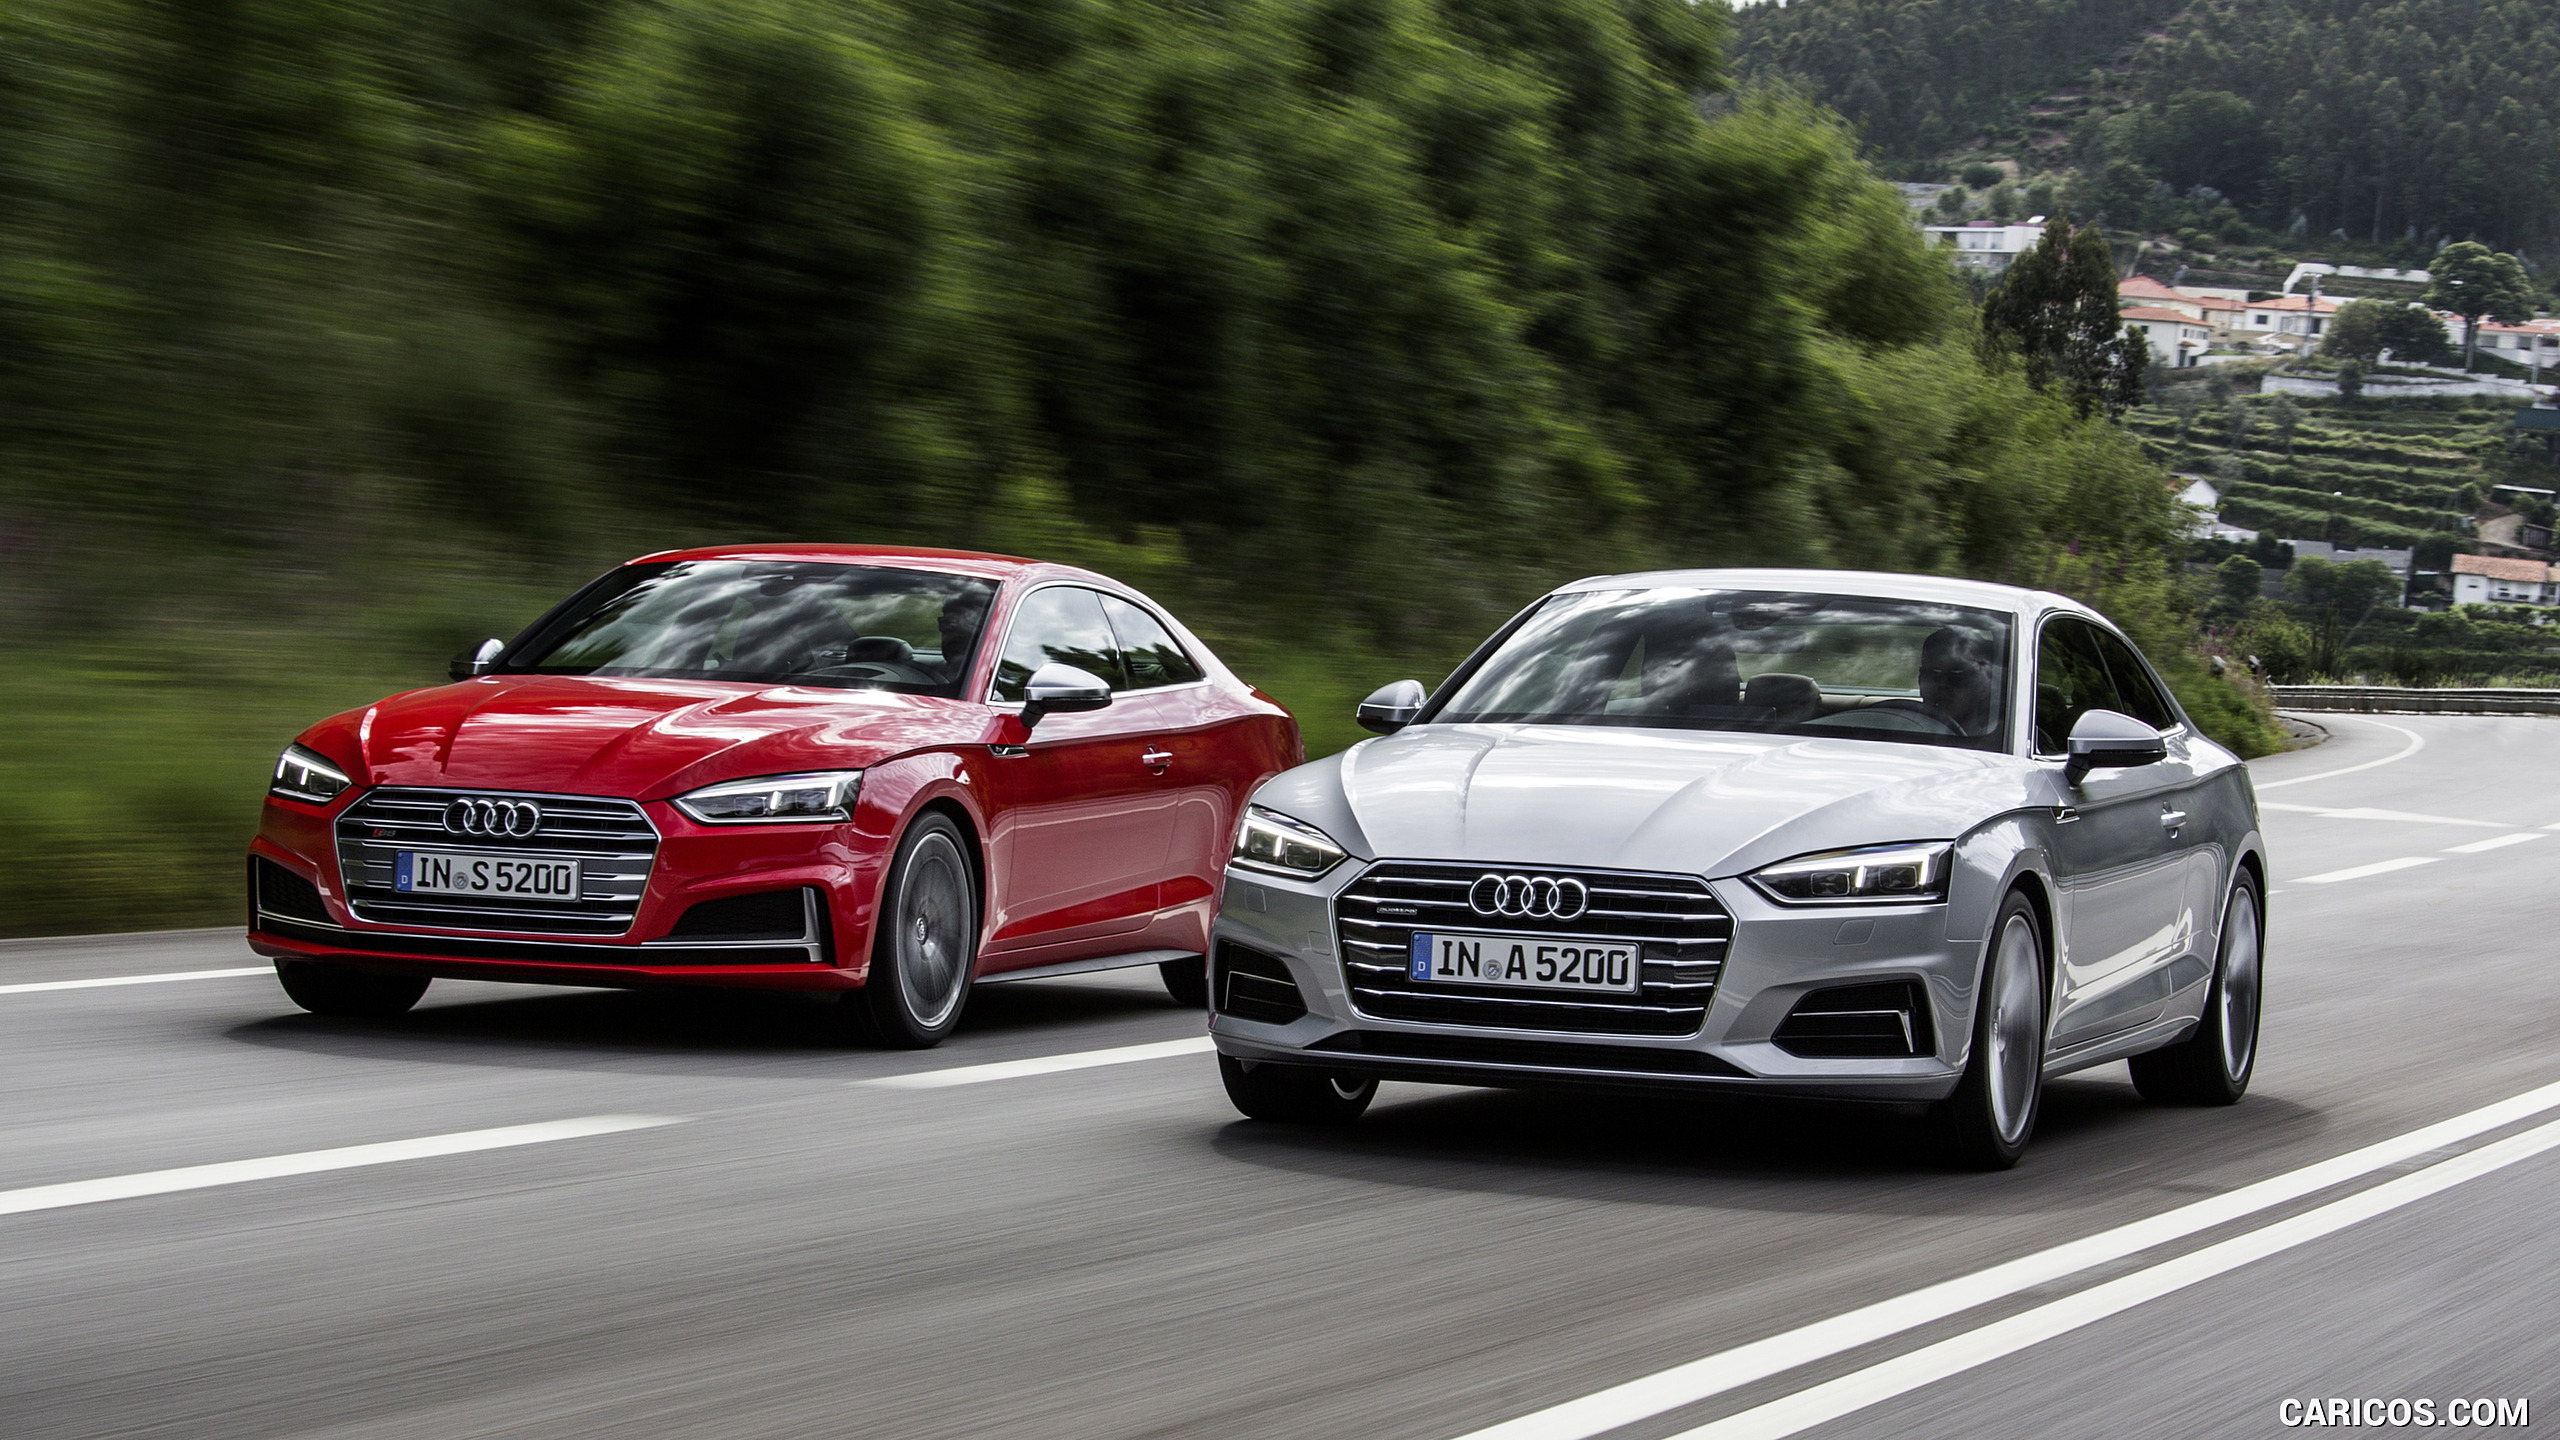 2018 Audi A5 Coup and Audi S5 Coupe   Front HD Wallpaper 101